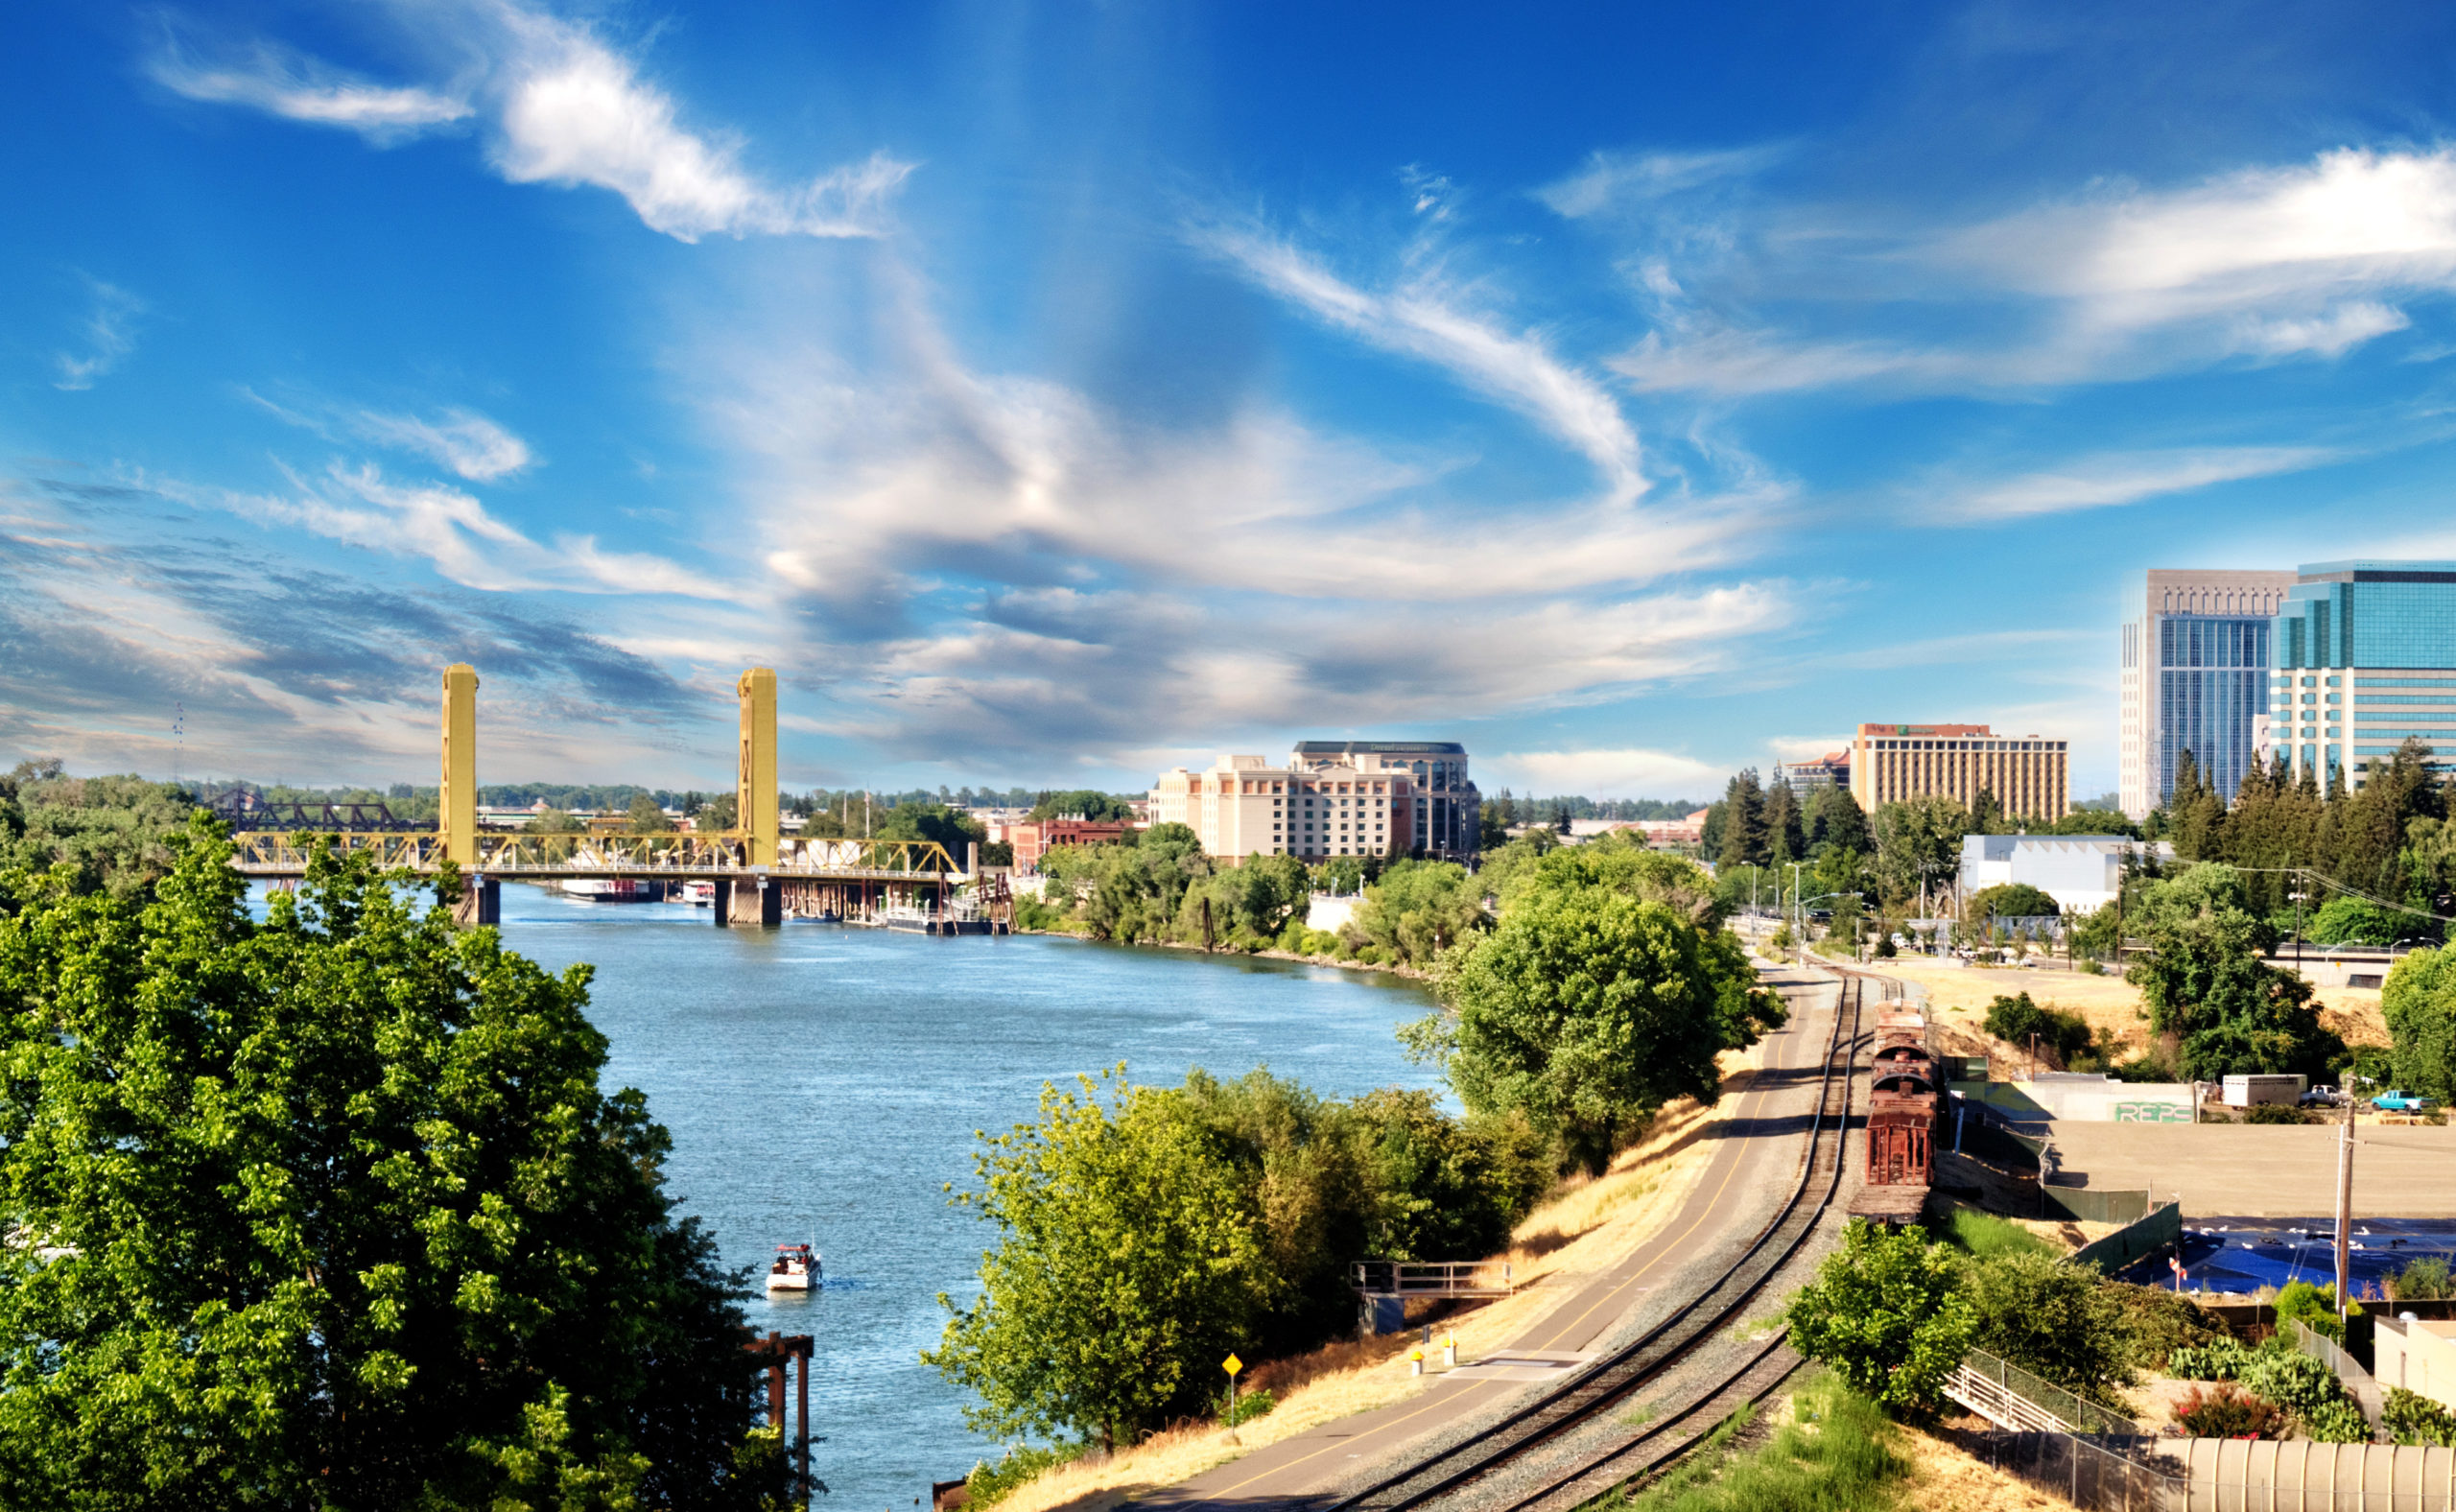 4-reasons-why-now-is-a-great-time-to-move-to-sacramento-premier-homes